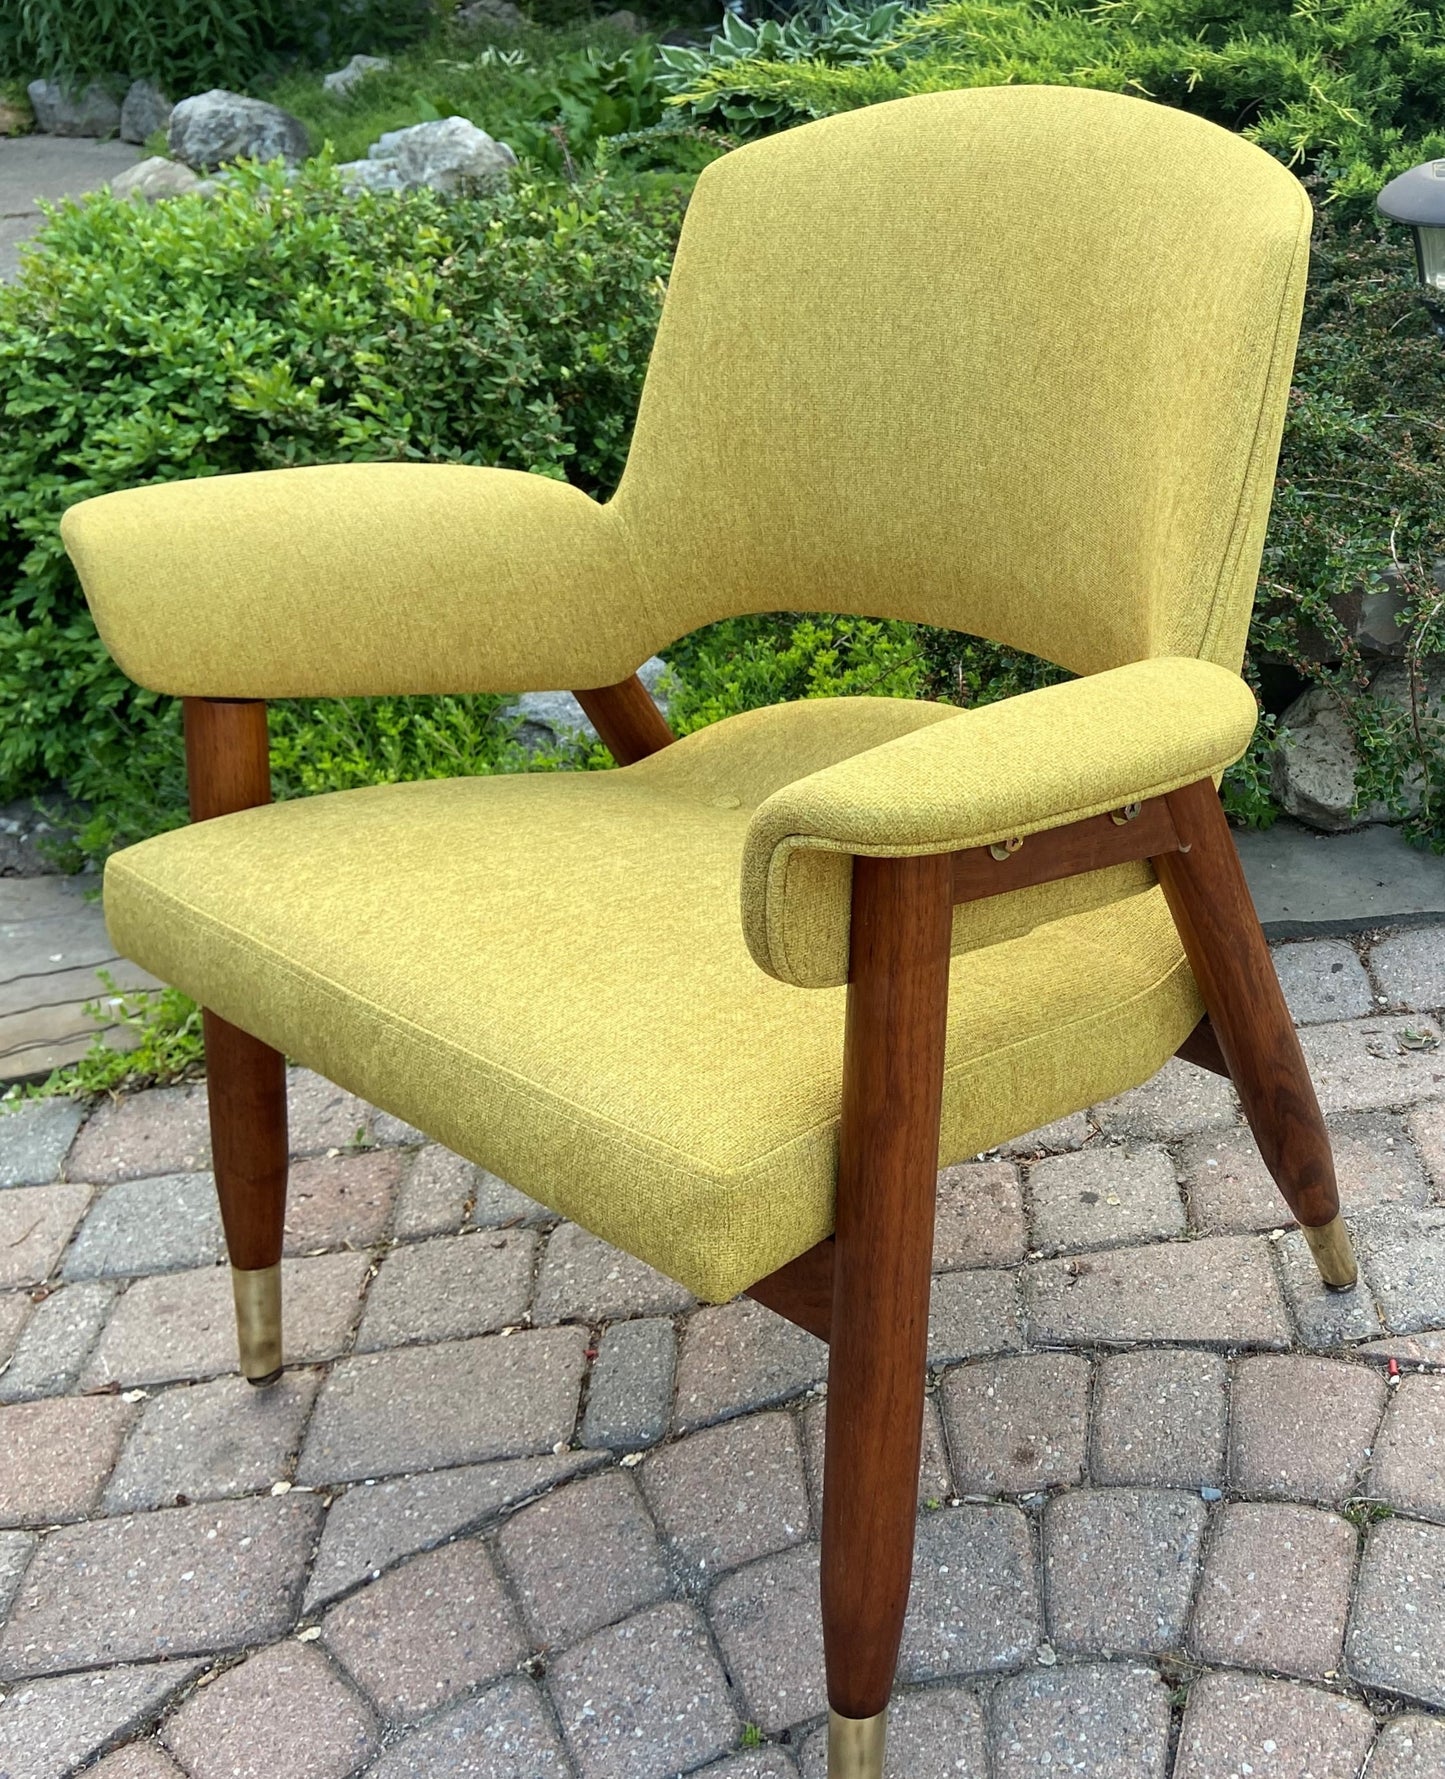 REFINISHED REUPHOLSTERED Mid Century Modern walnut armchair, Perfect